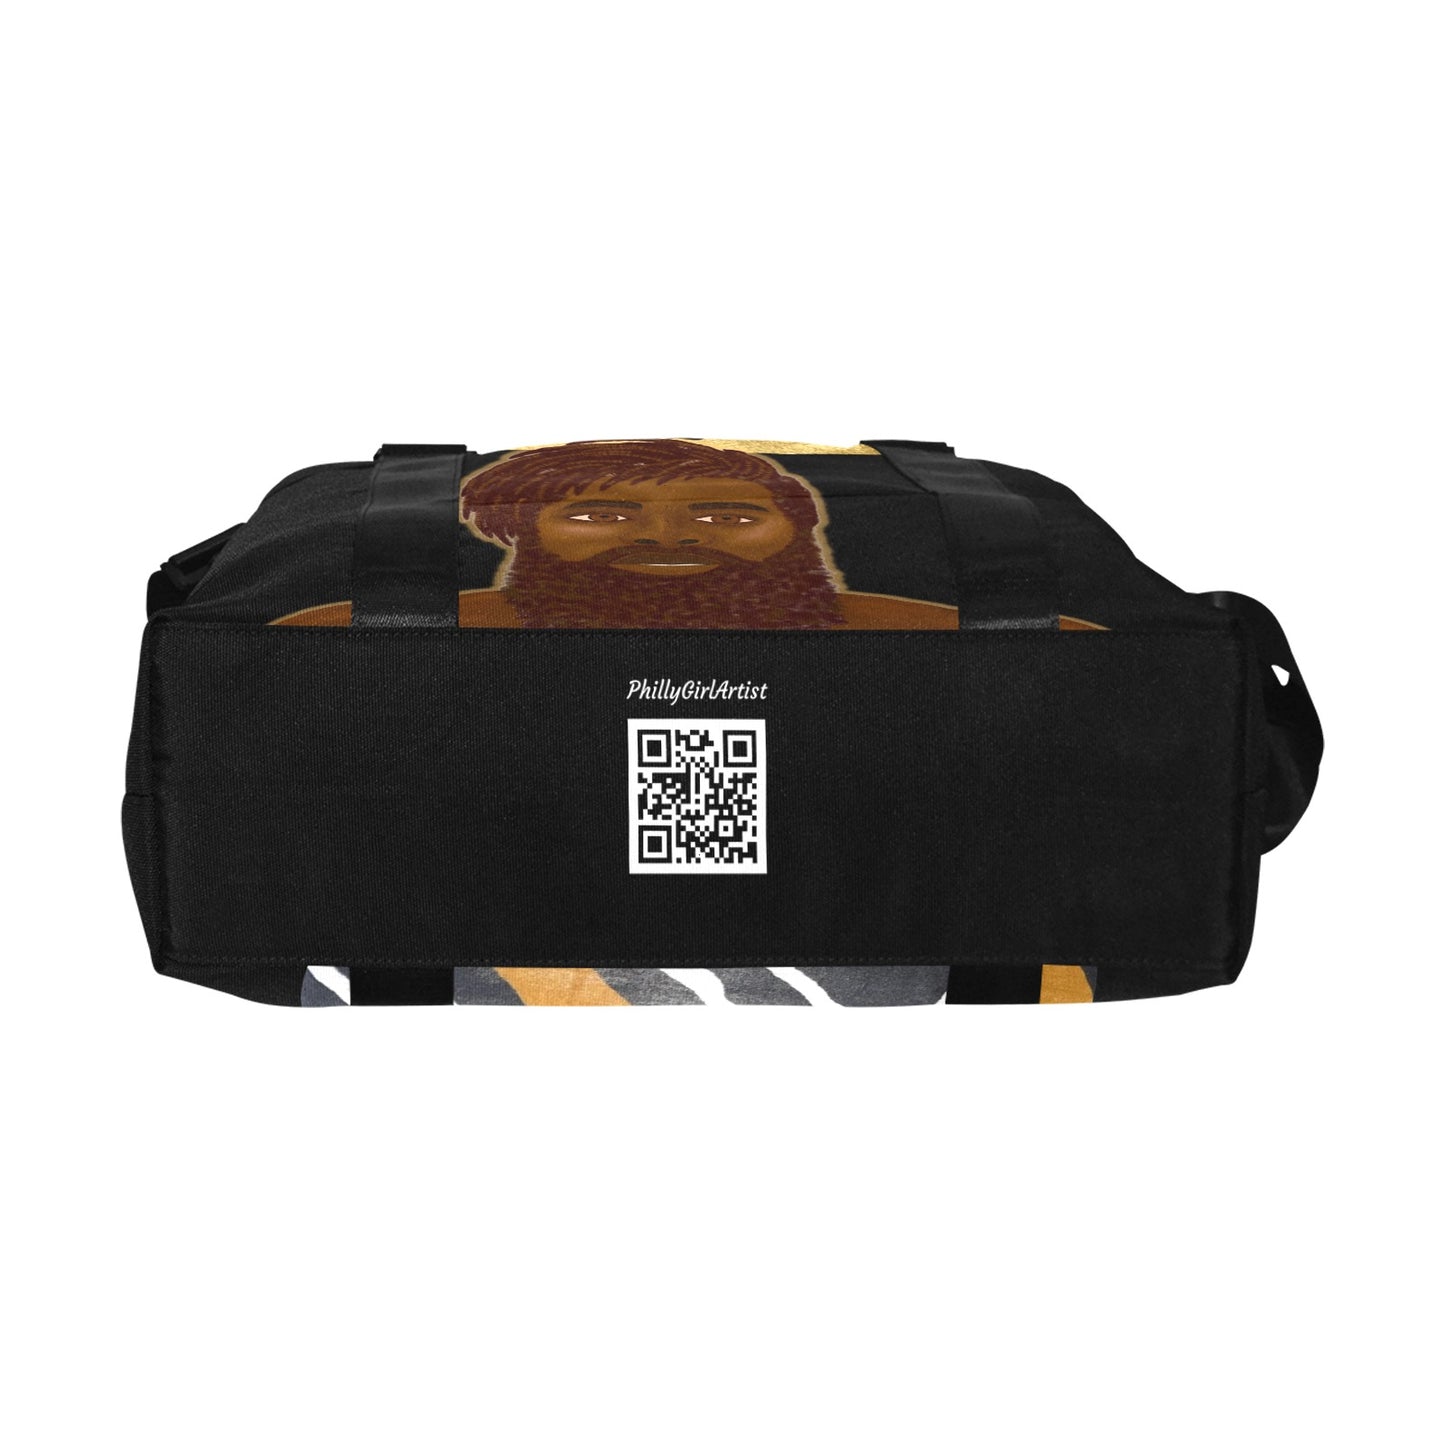 BLACK KING - Large Capacity CARRY-ON Duffle Bag